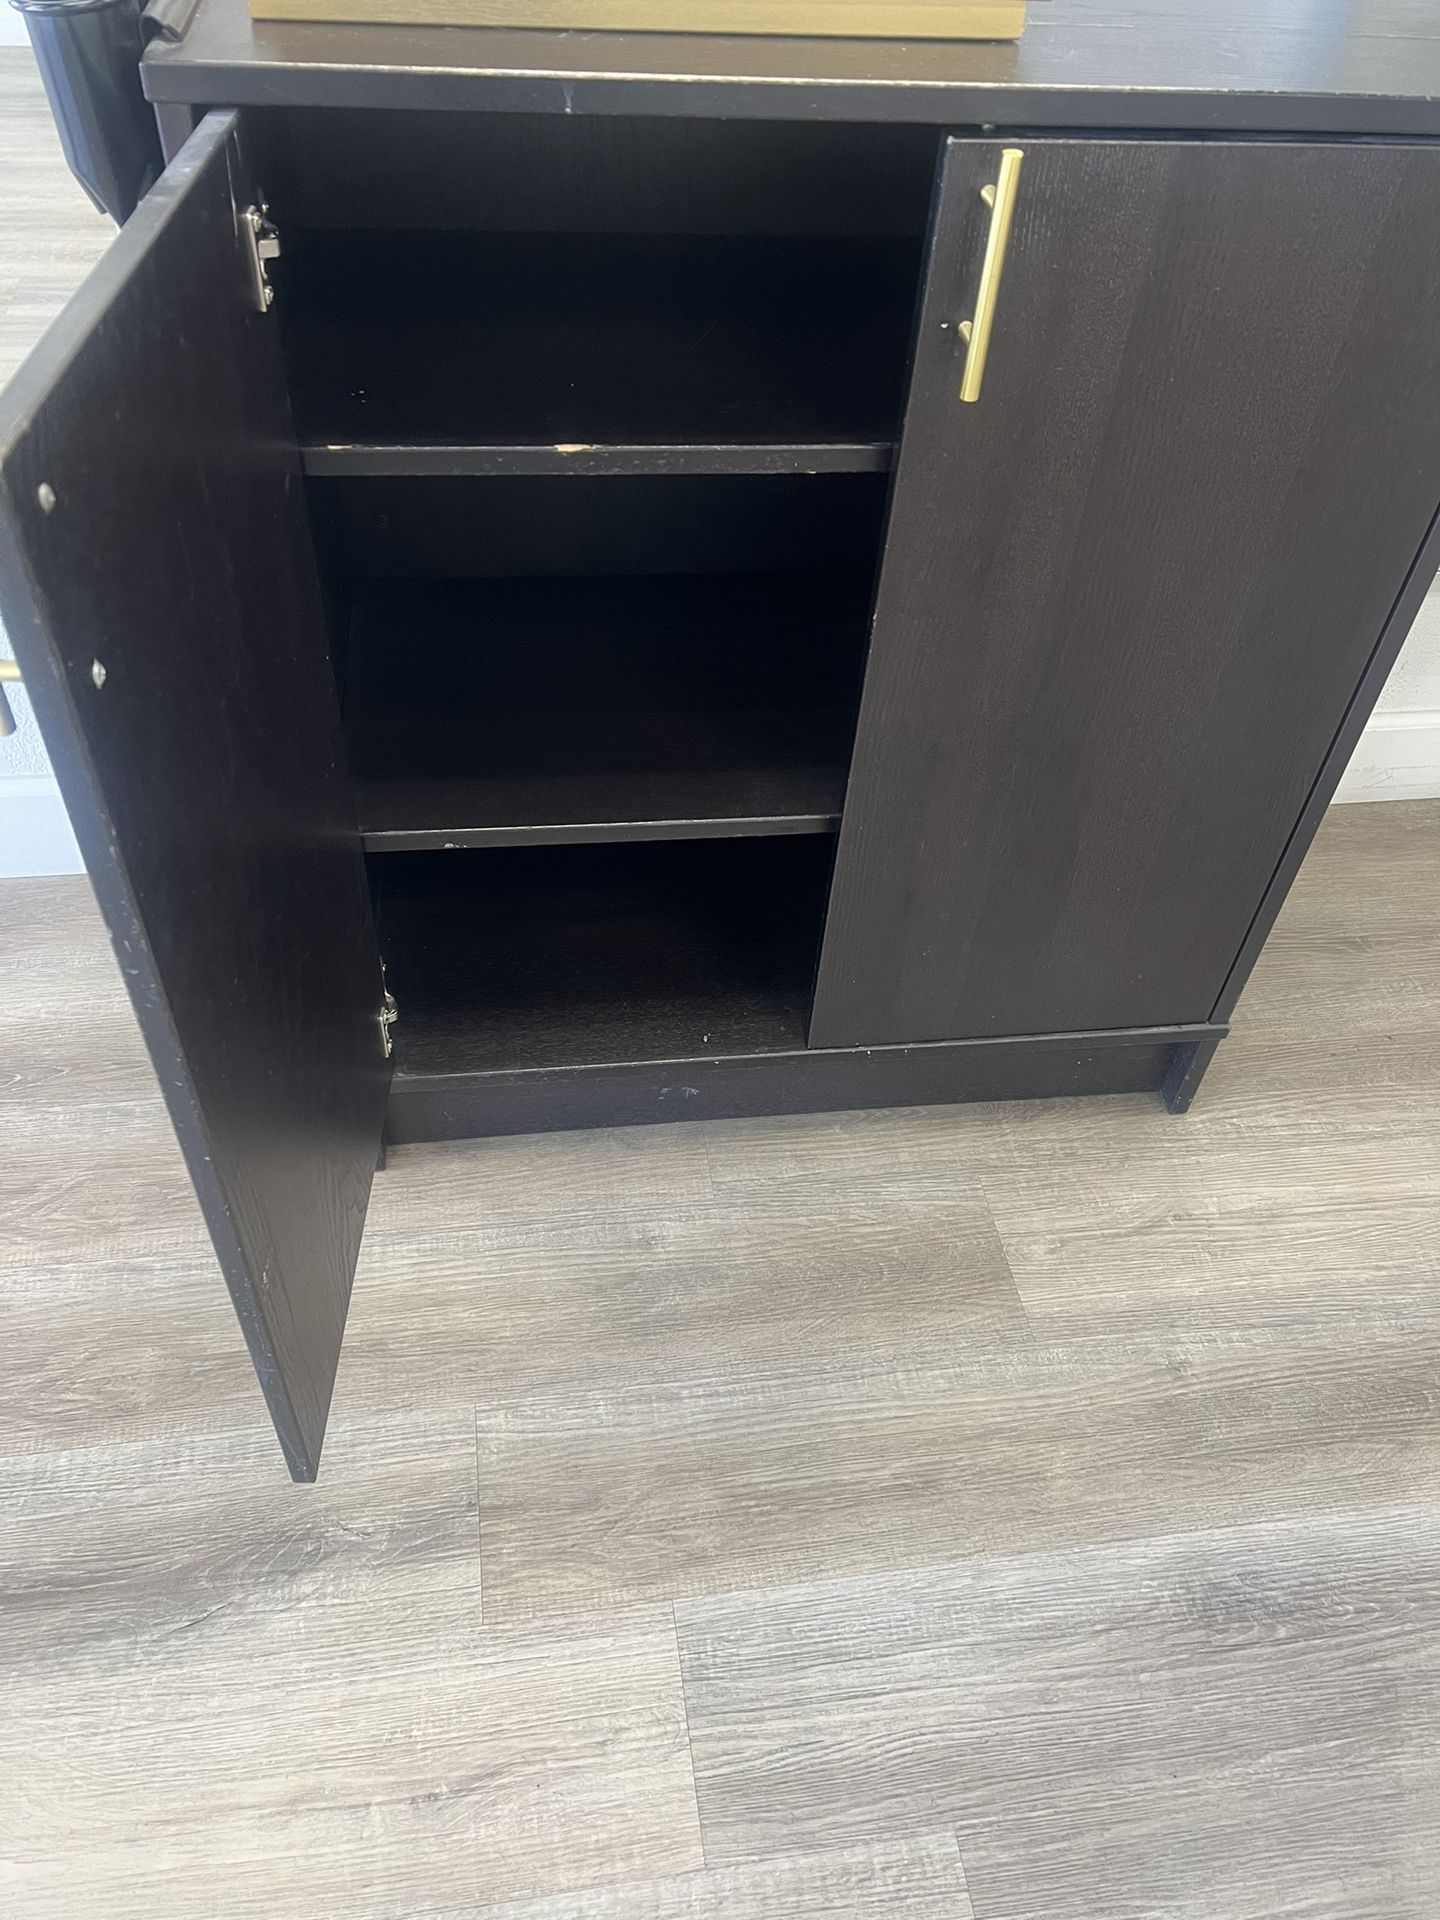 Cabinets (15 Available) $25 Each